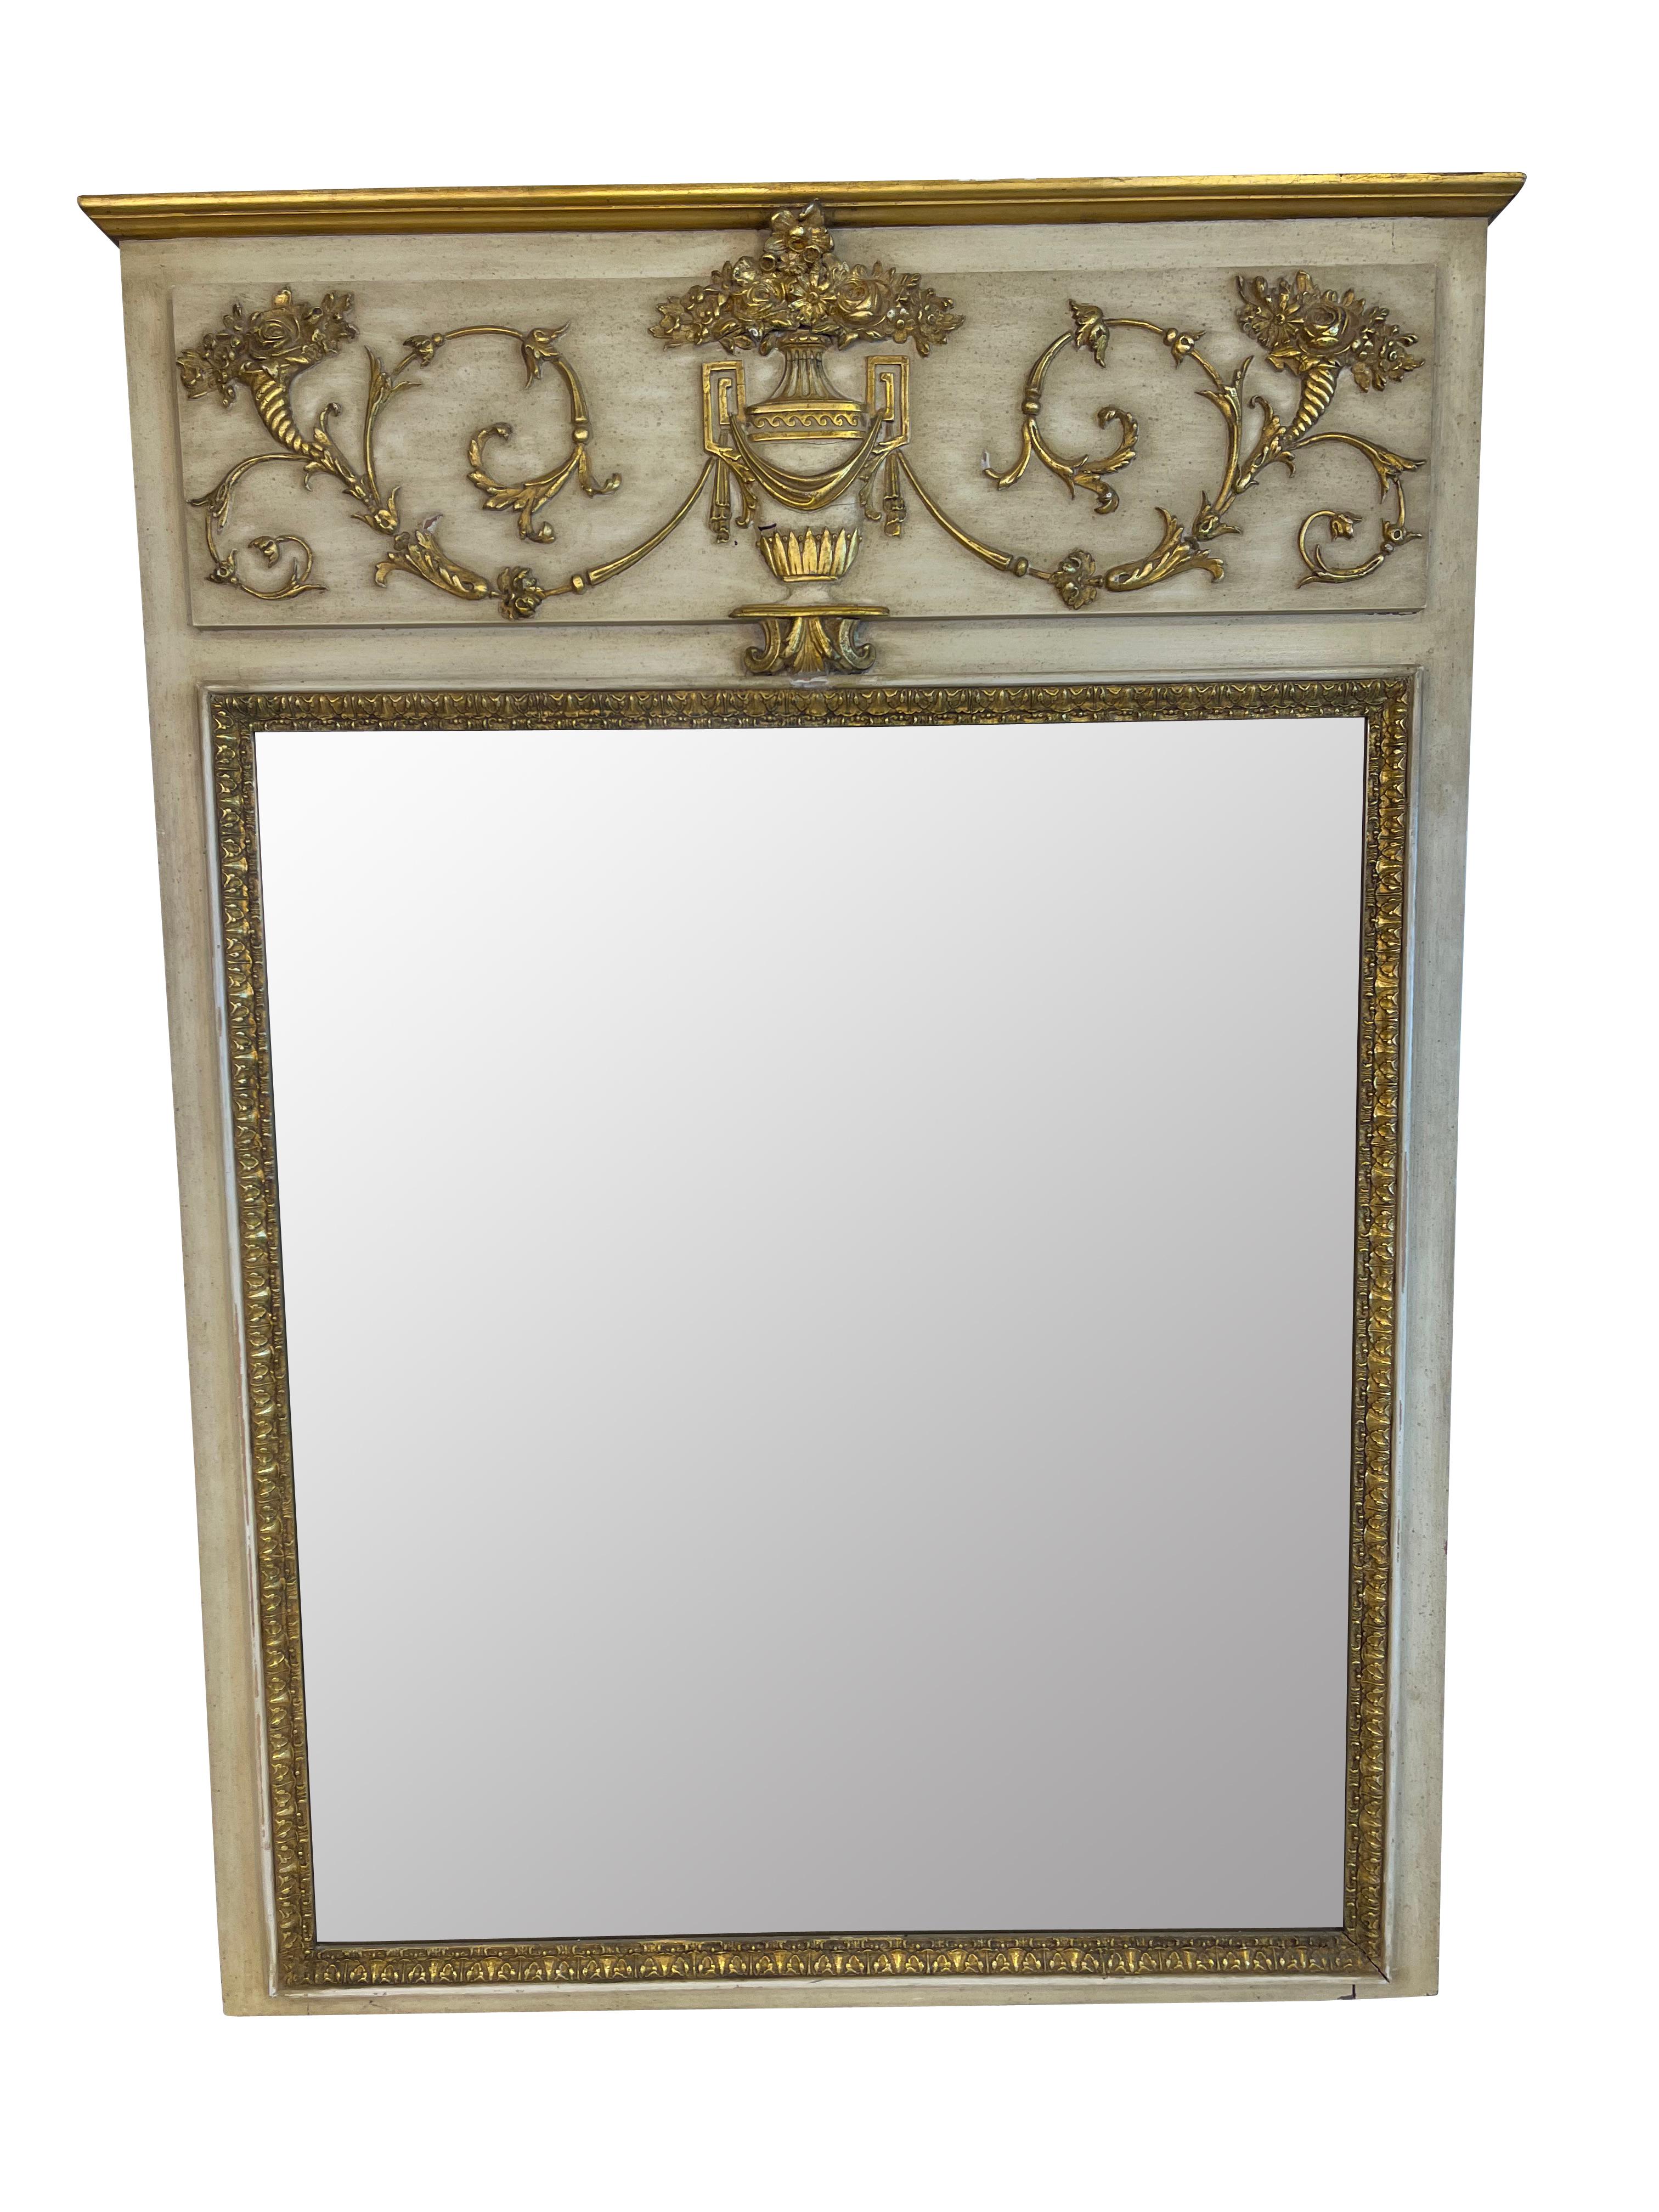 American Louis XVI Style Ivory and Gilt Trumeau Mirror